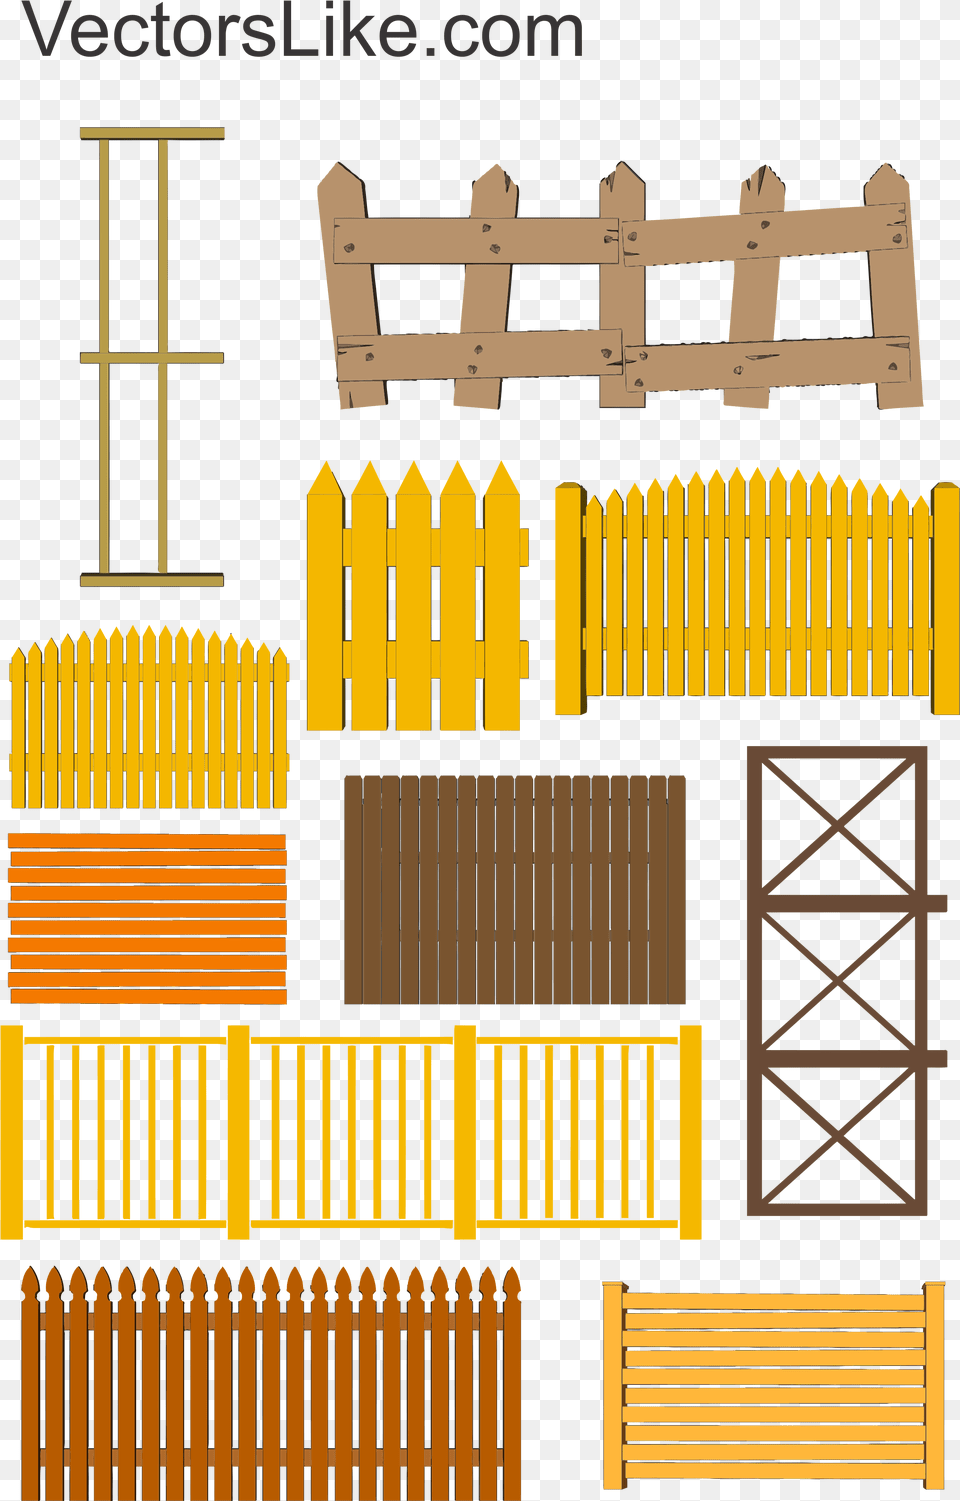 Wooden Fence Wooden Fence Vector Vectors Like Wood, Gate, Picket Free Transparent Png